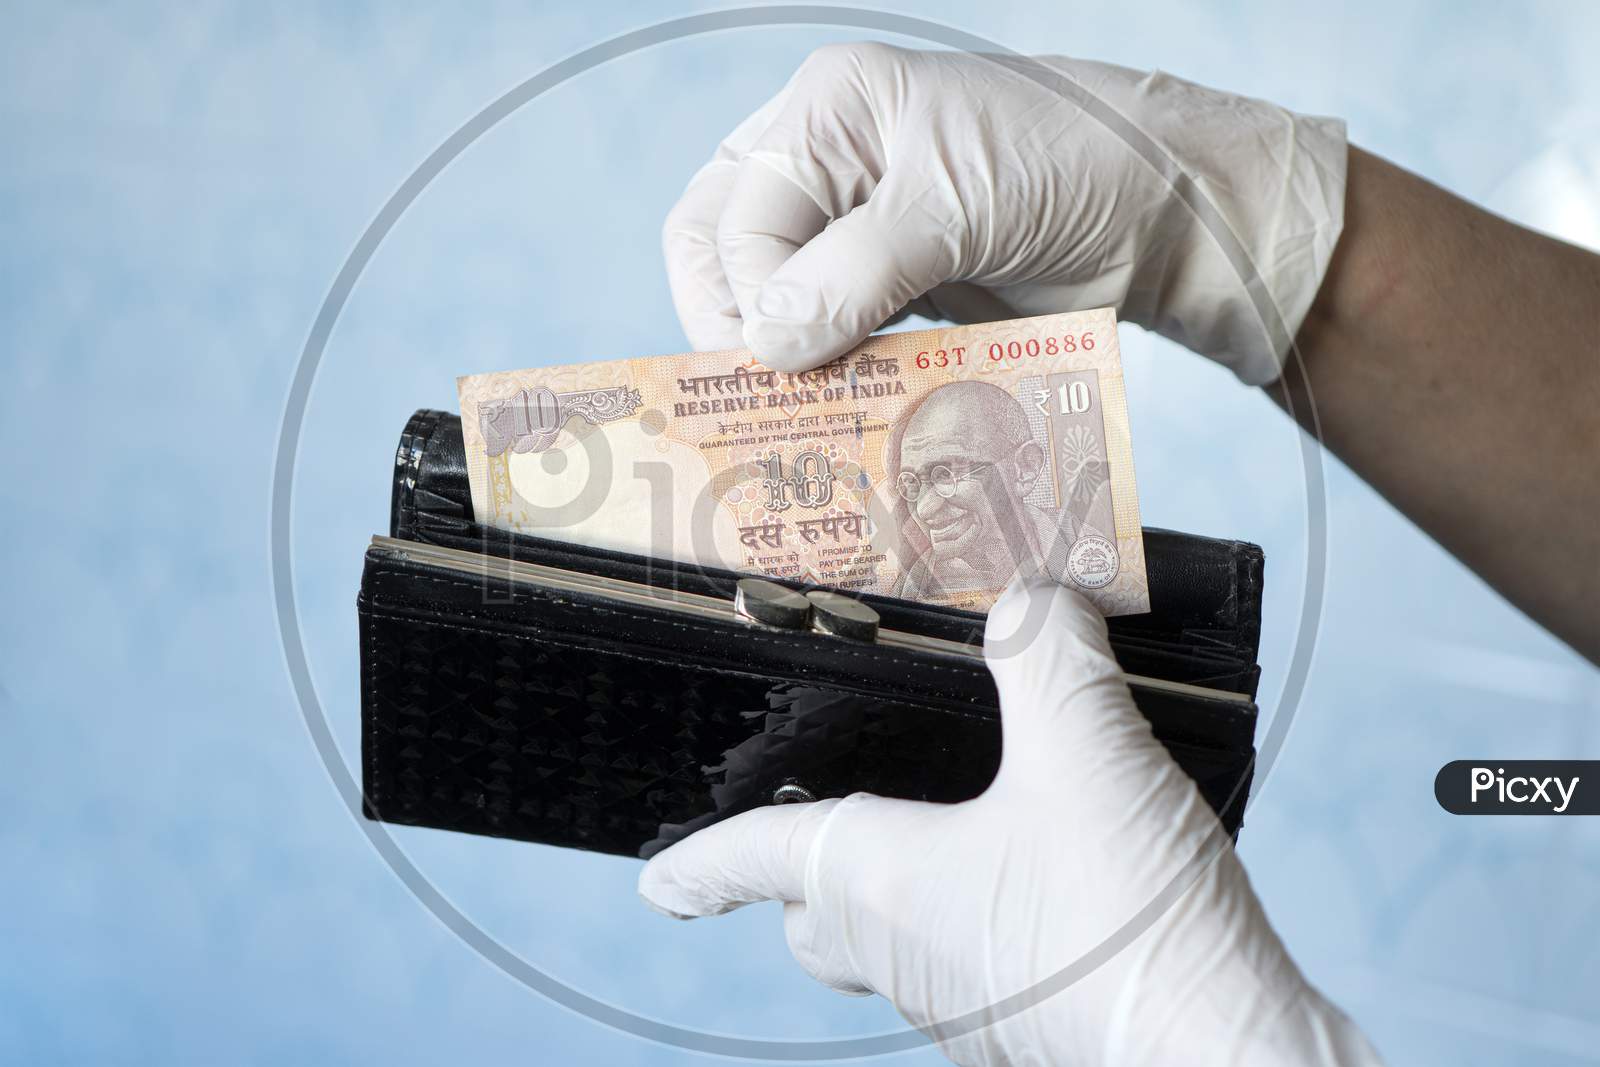 Woman Taking Money Out Female Wallet Wearing Rubber Gloves To Prevent The Spread Of Bacterias Or Viruses, Take Shopping During Coronavirus Pandemic. Microbes On Money. Refusal Of Cash.